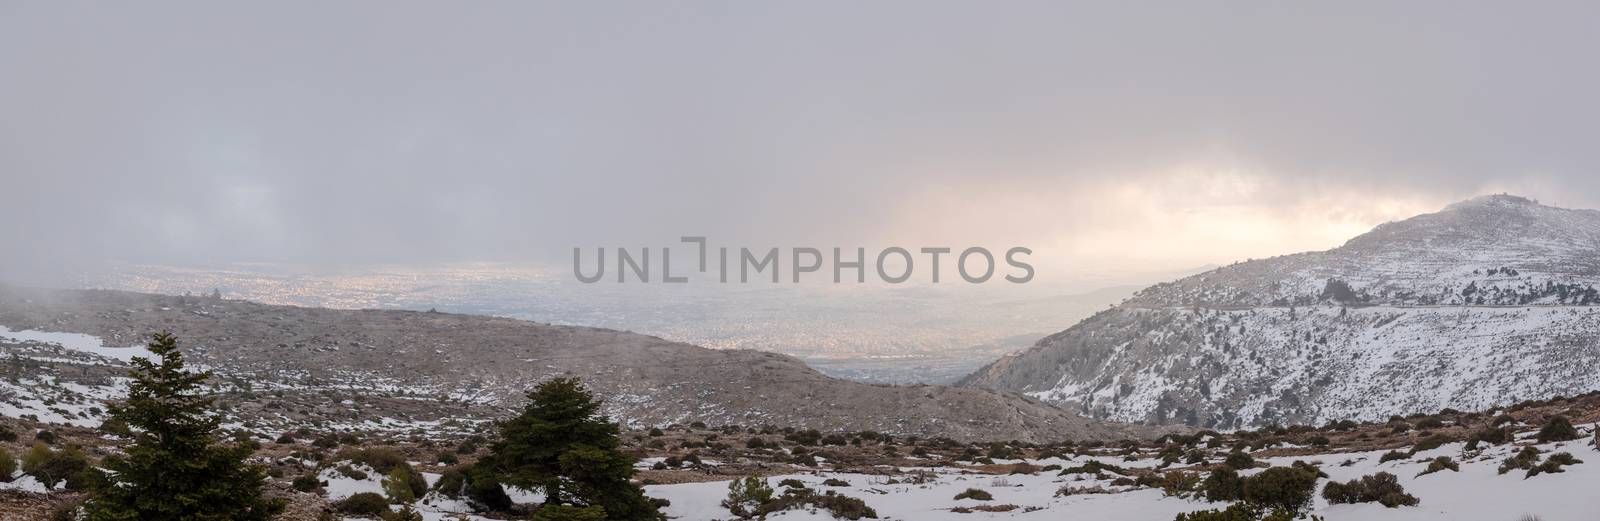 Parnitha mountain with snow, Greece by smoxx